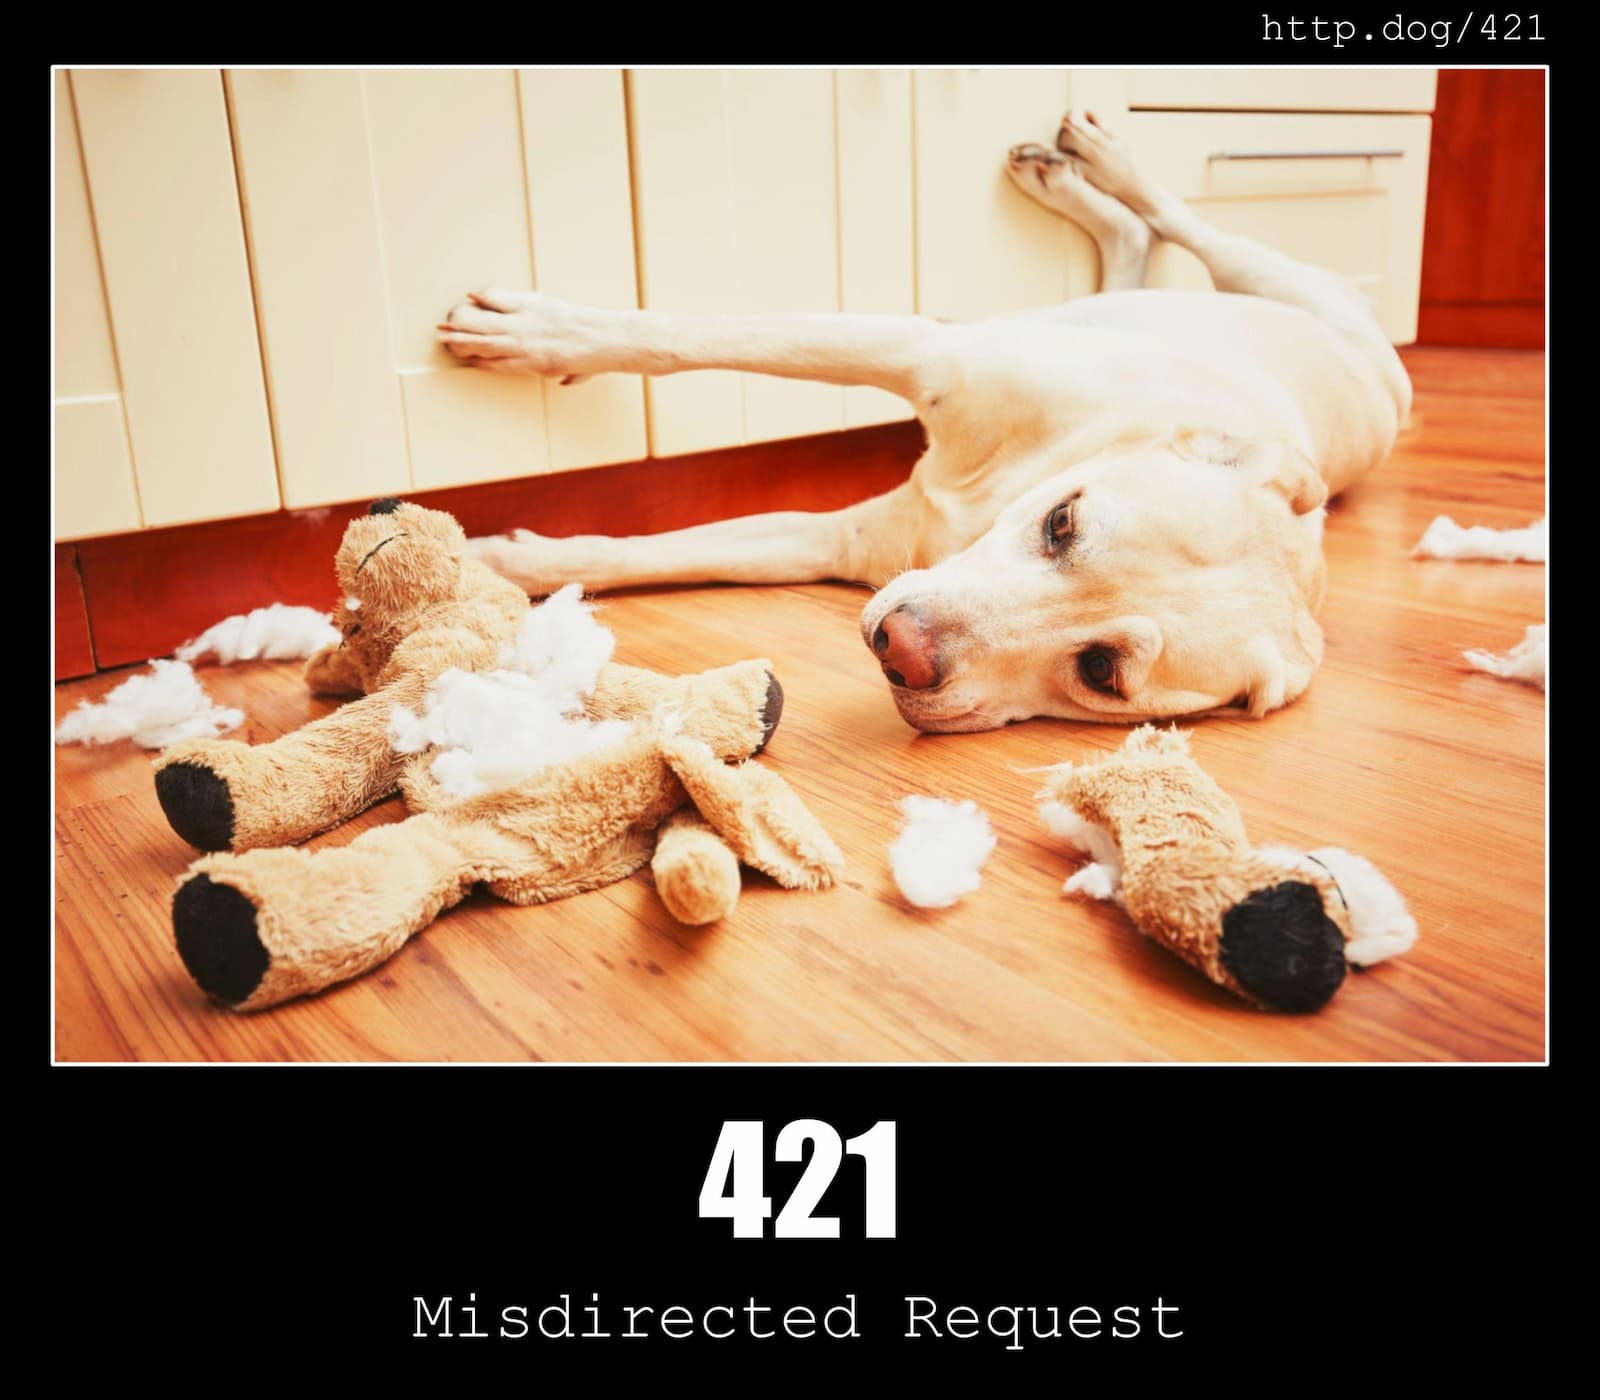 HTTP Status Code 421 Misdirected Request & Dogs